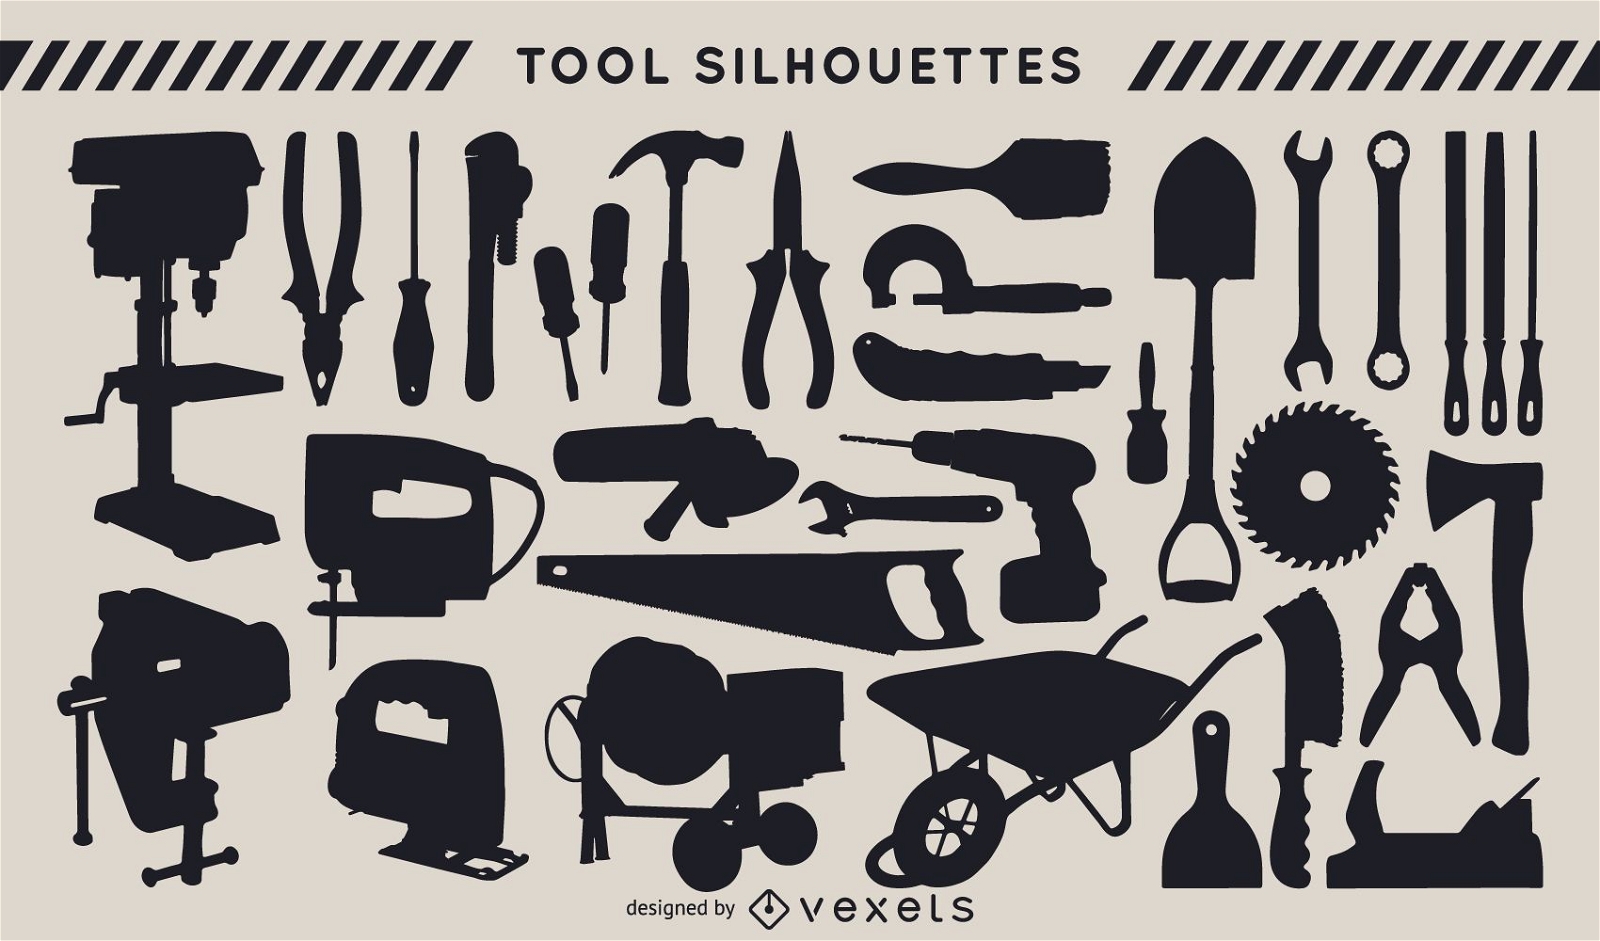 Construction tools silhouette set - Vector download